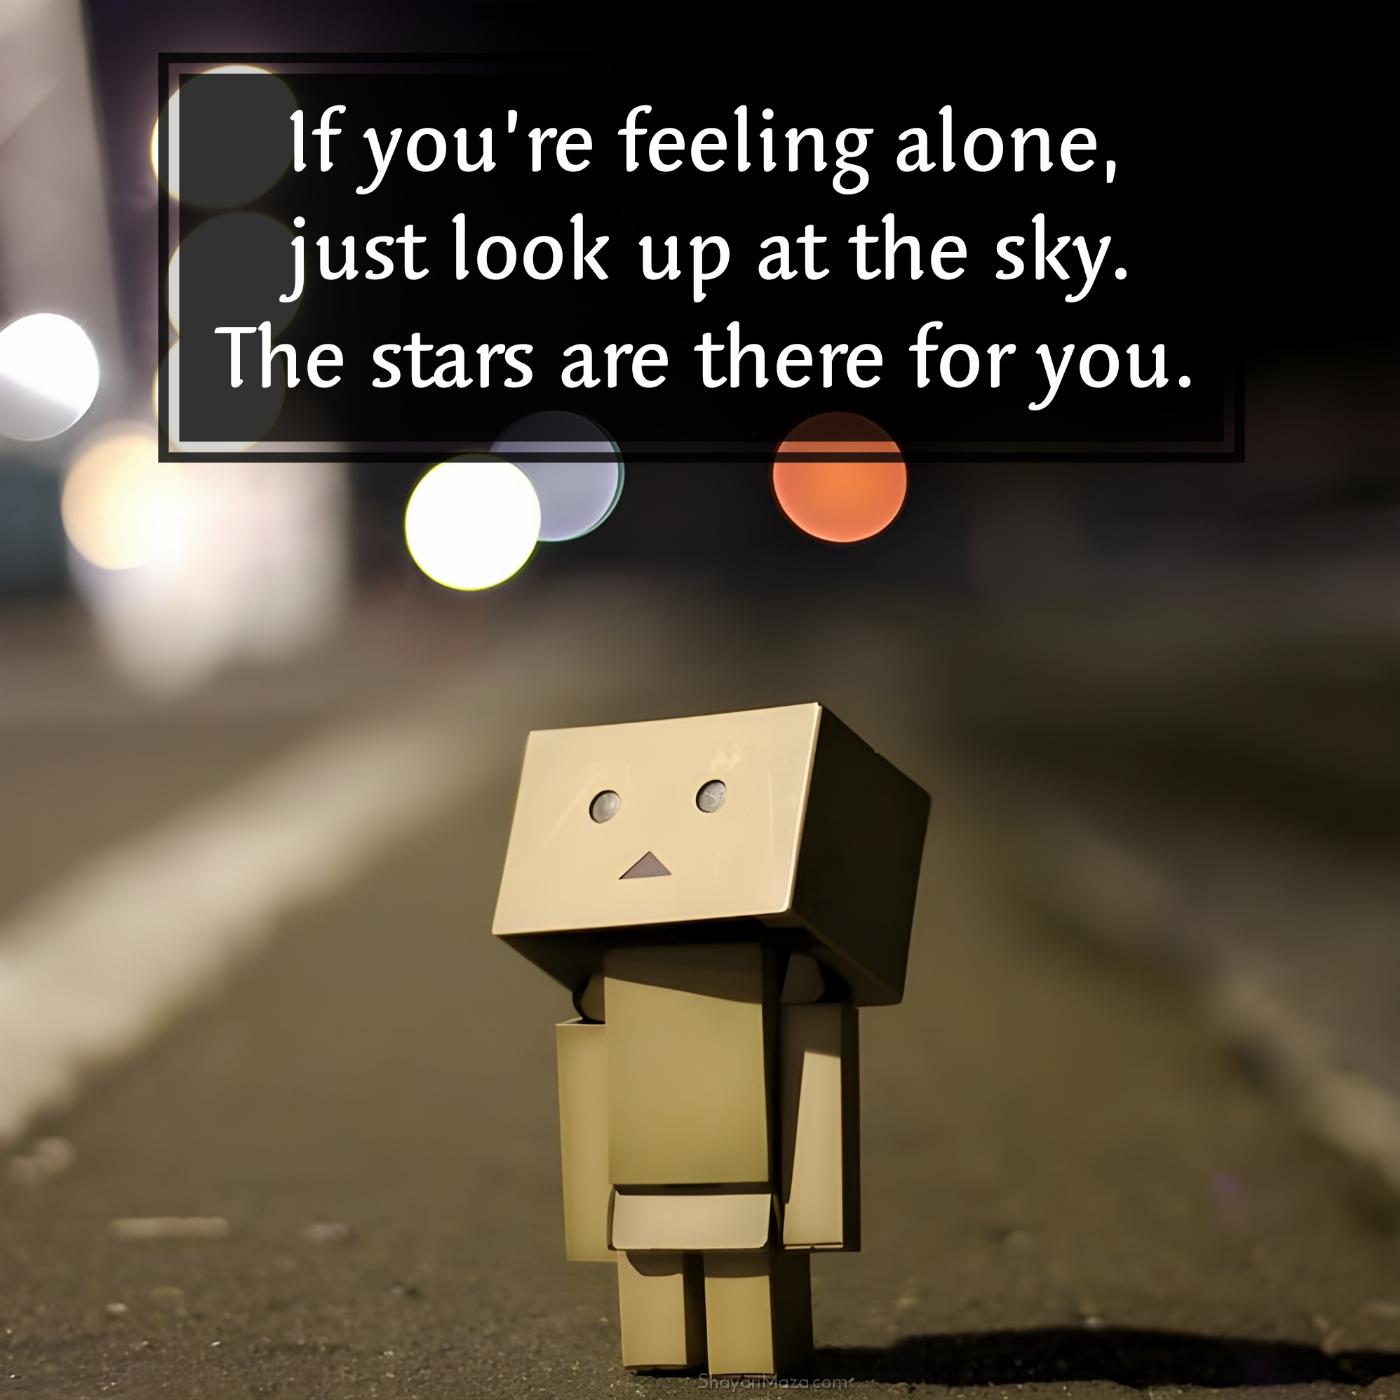 If youre feeling alone just look up at the sky